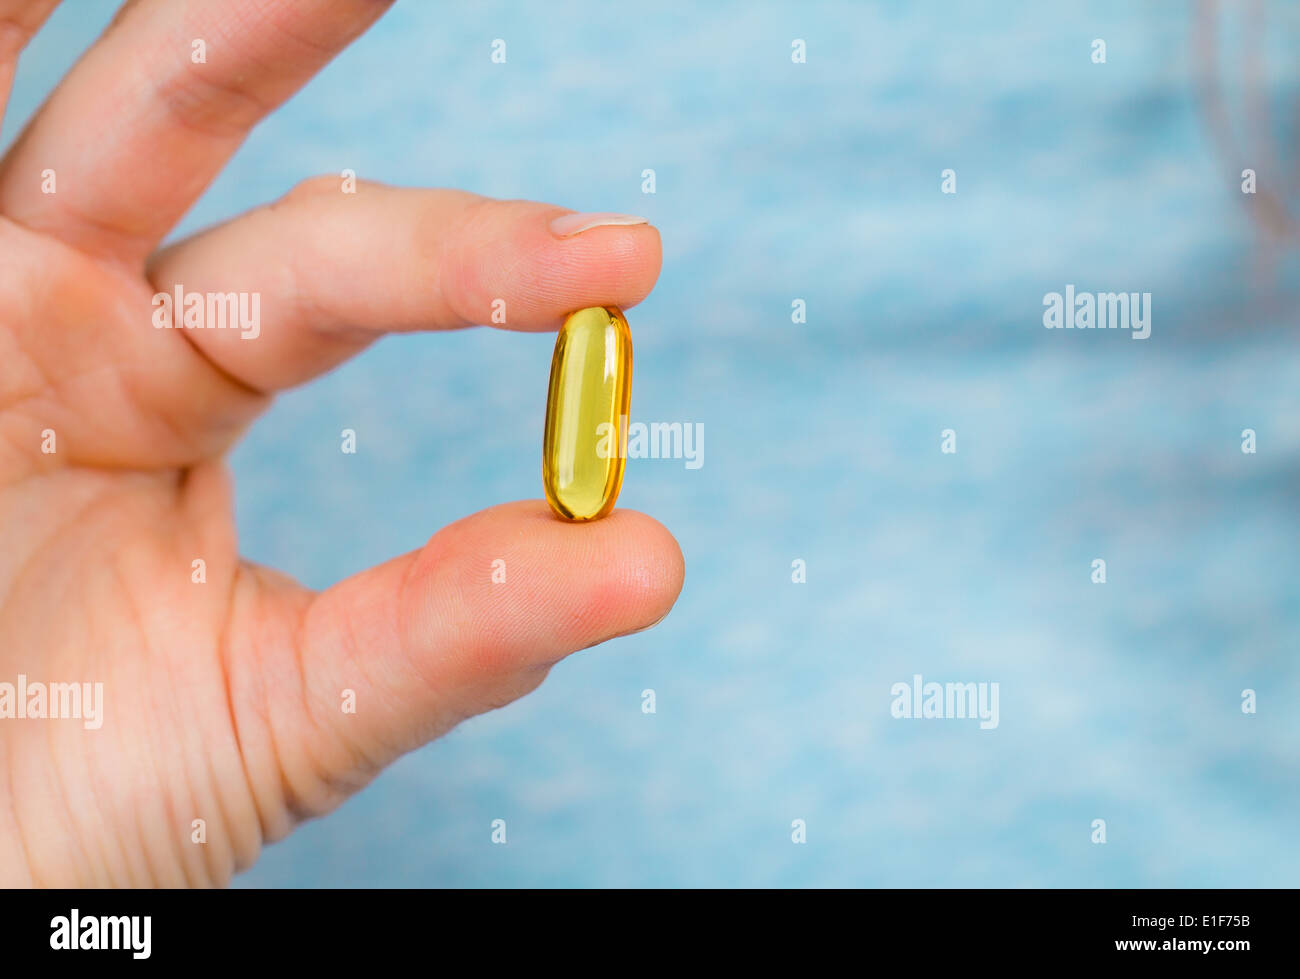 Close-up shot of fingers holding a fish oil capsule. Stock Photo